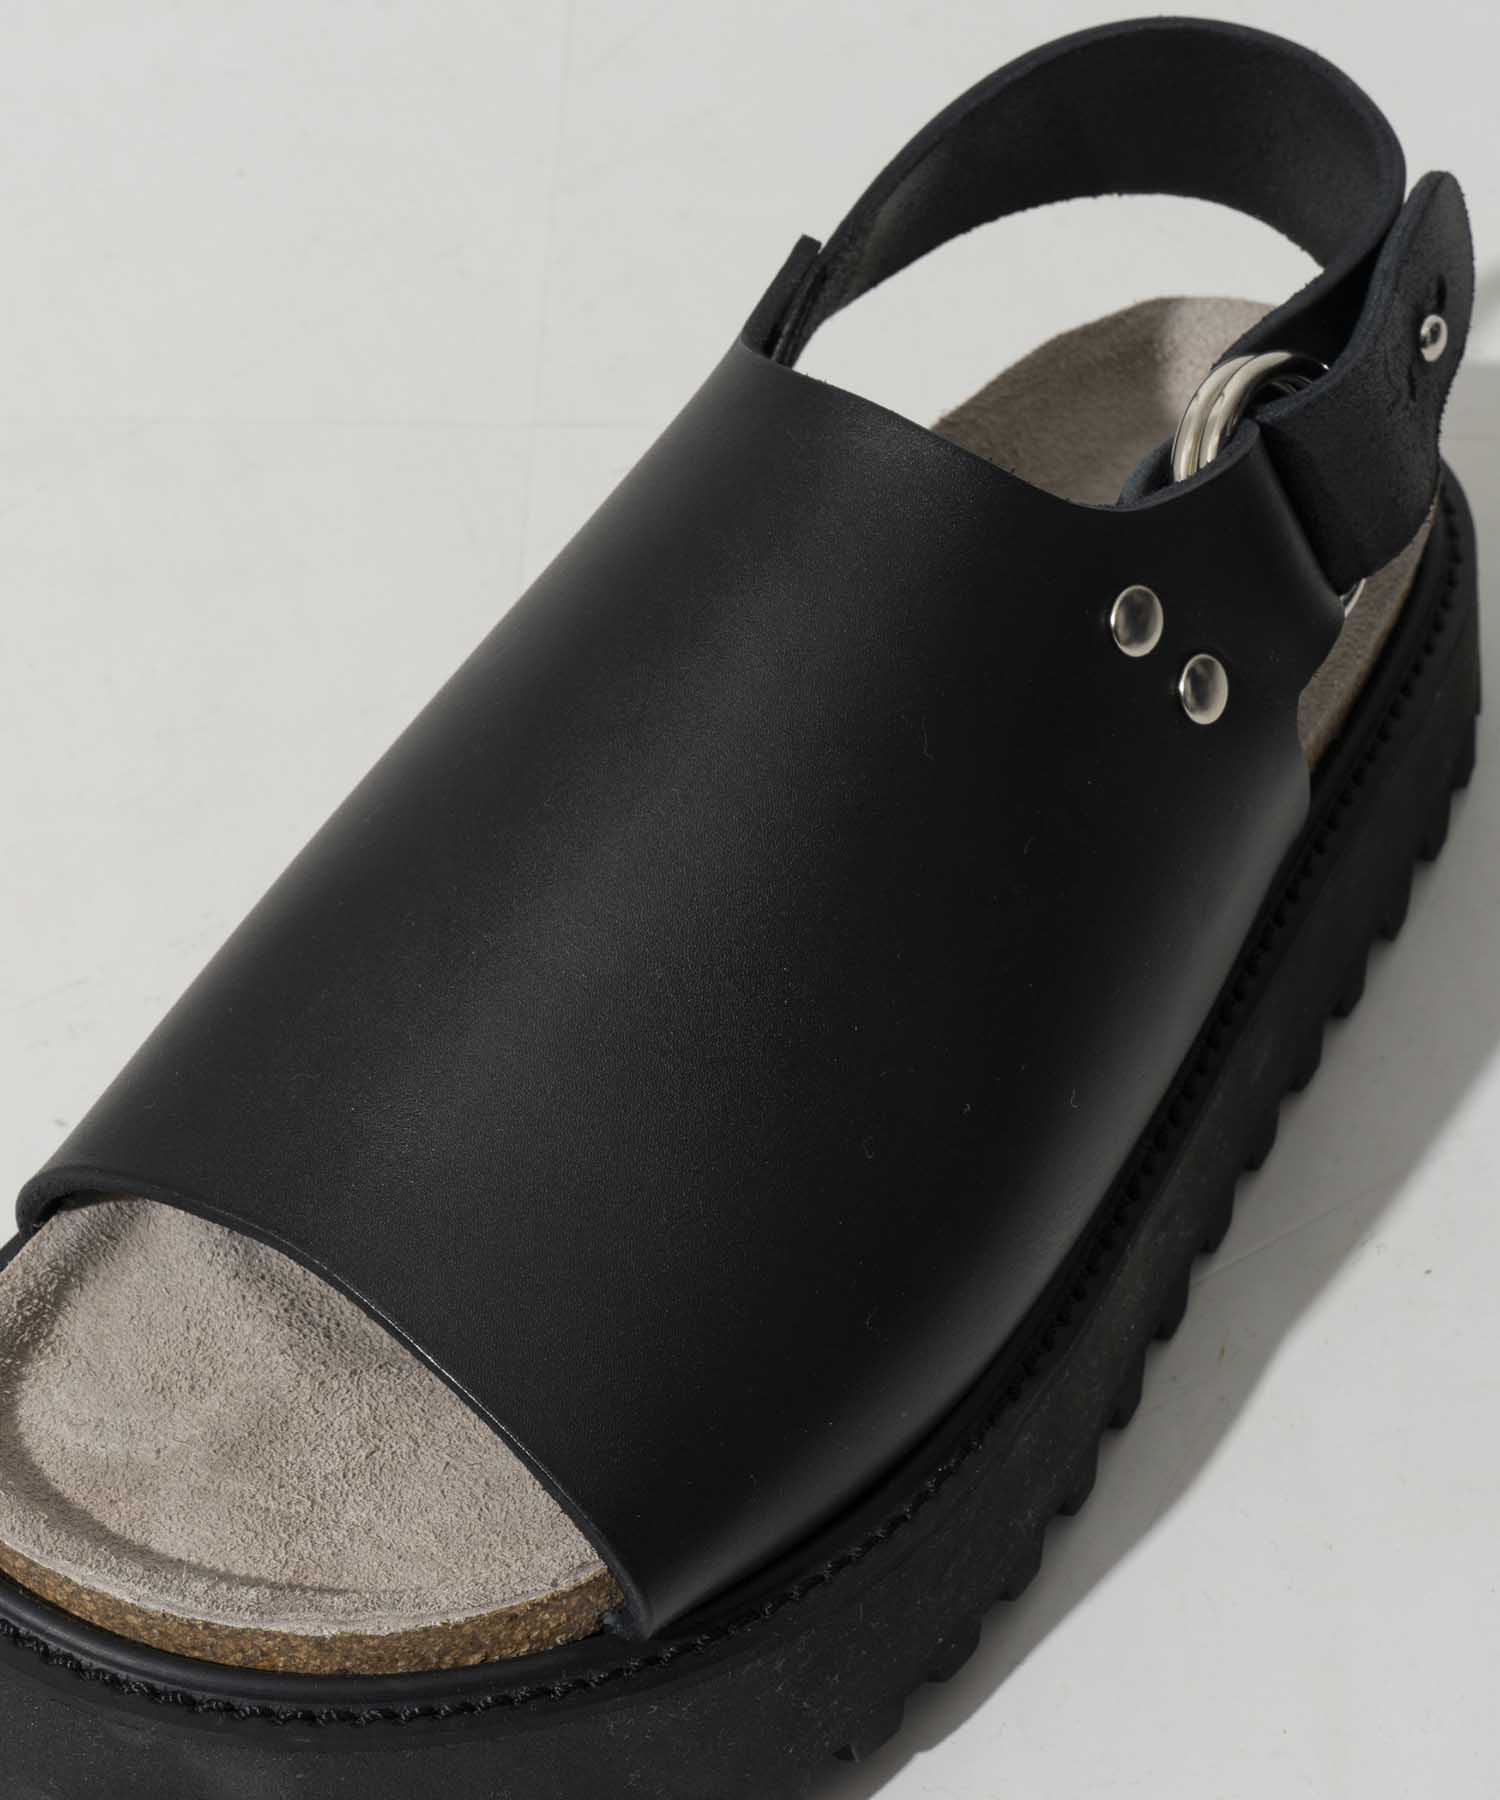 【SPECIAL SHOES FACTORY COLLABORATION】Italian Vibram Sole Heel Strap Sandal Made In TOKYO